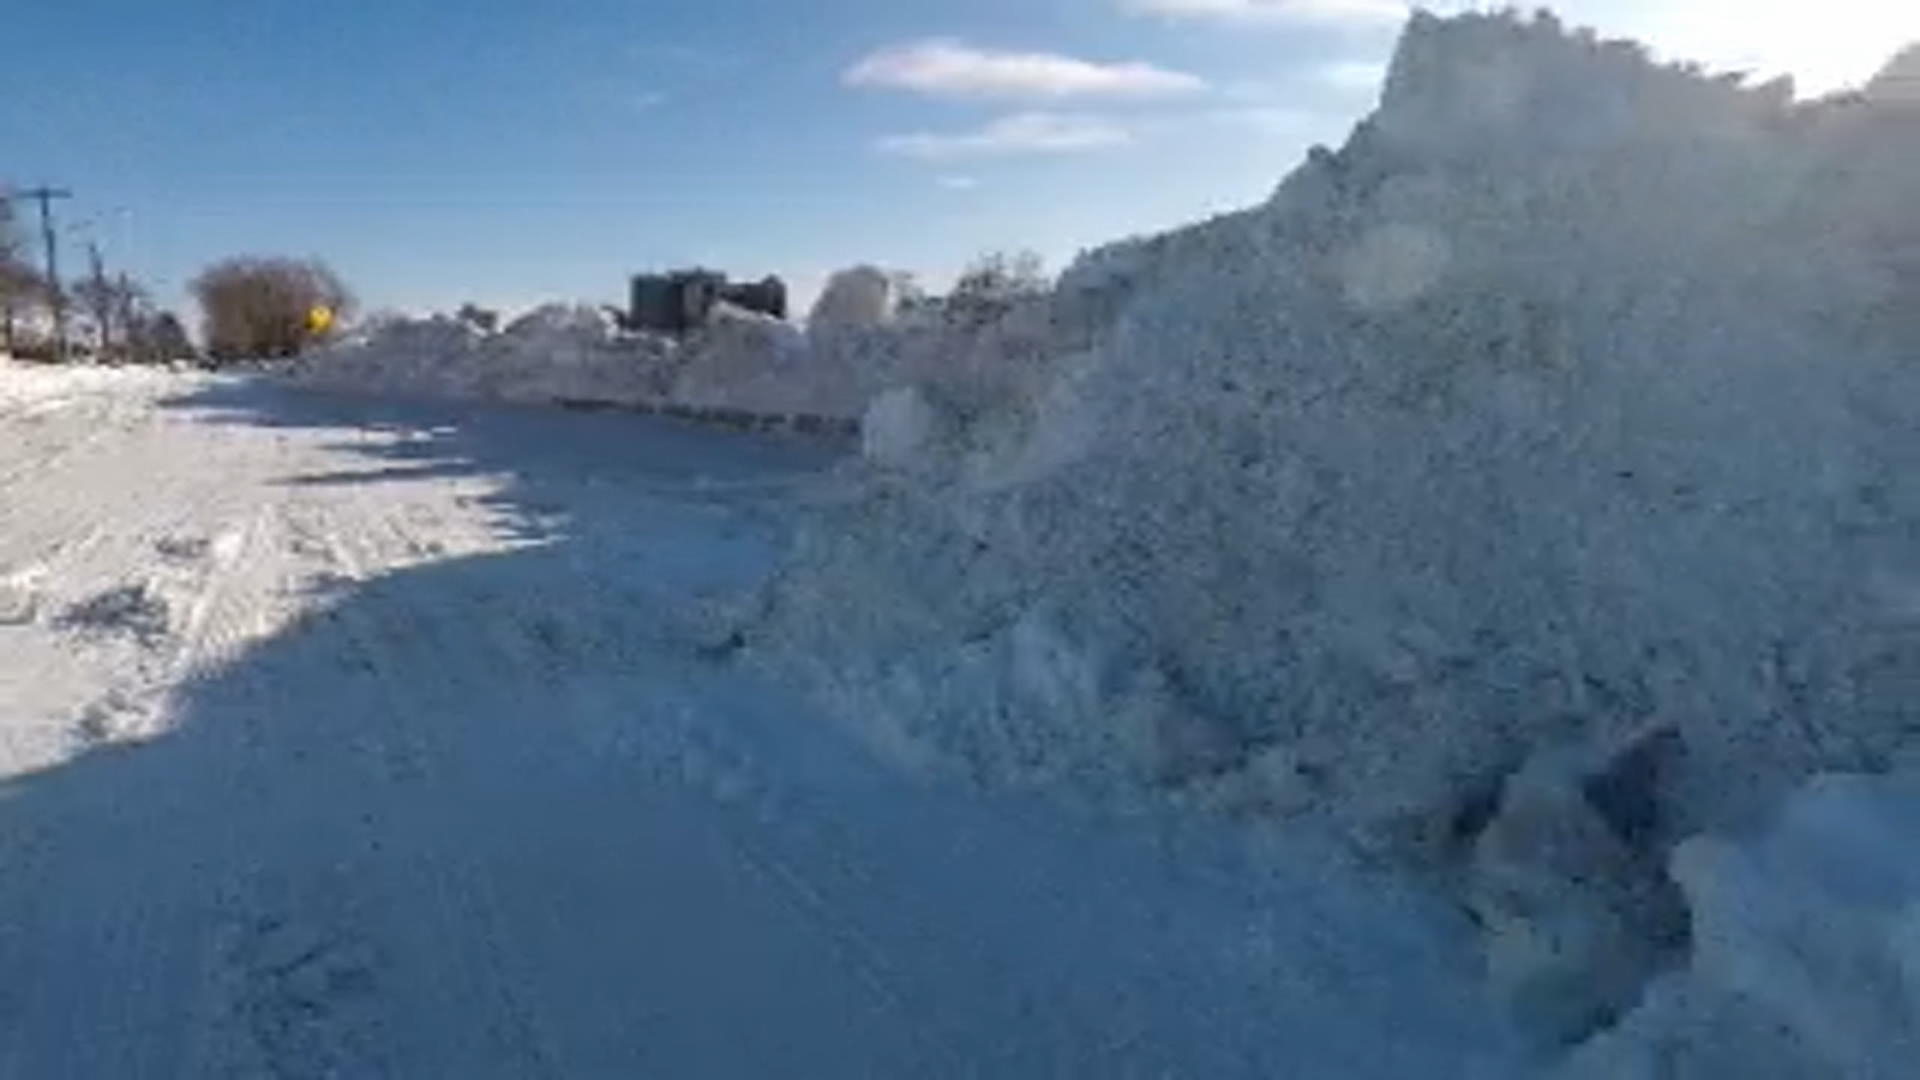 Winnipeg councillor on changing budgetary practices when it comes to snow clearing